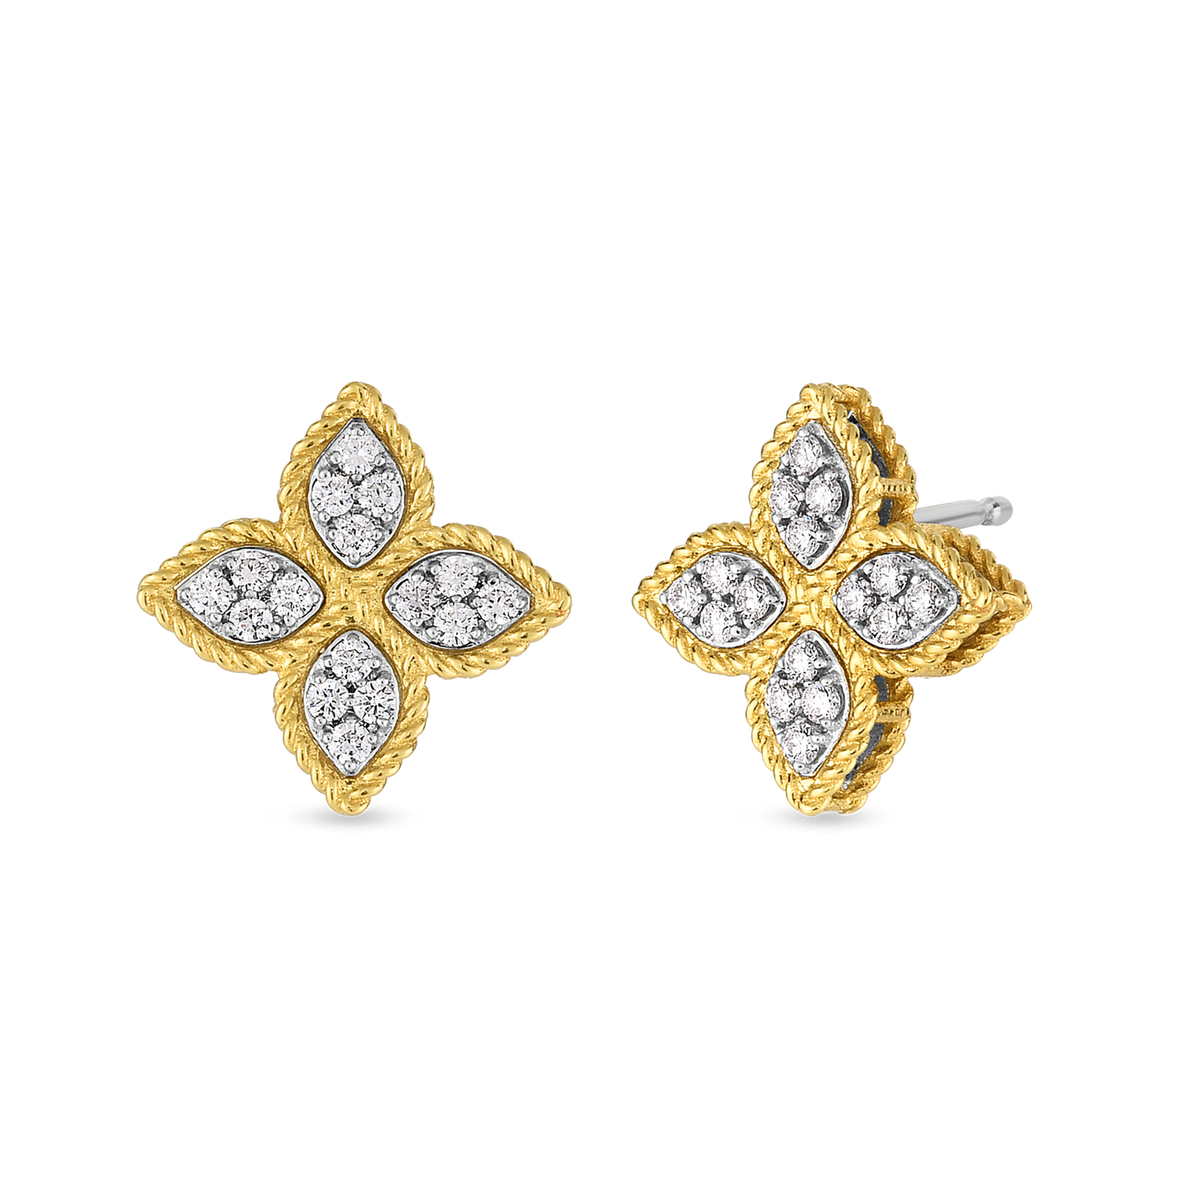 Roberto Coin 18Kt Yellow Gold Princess Stud Flower Earrings with .38cttw Natural Diamonds